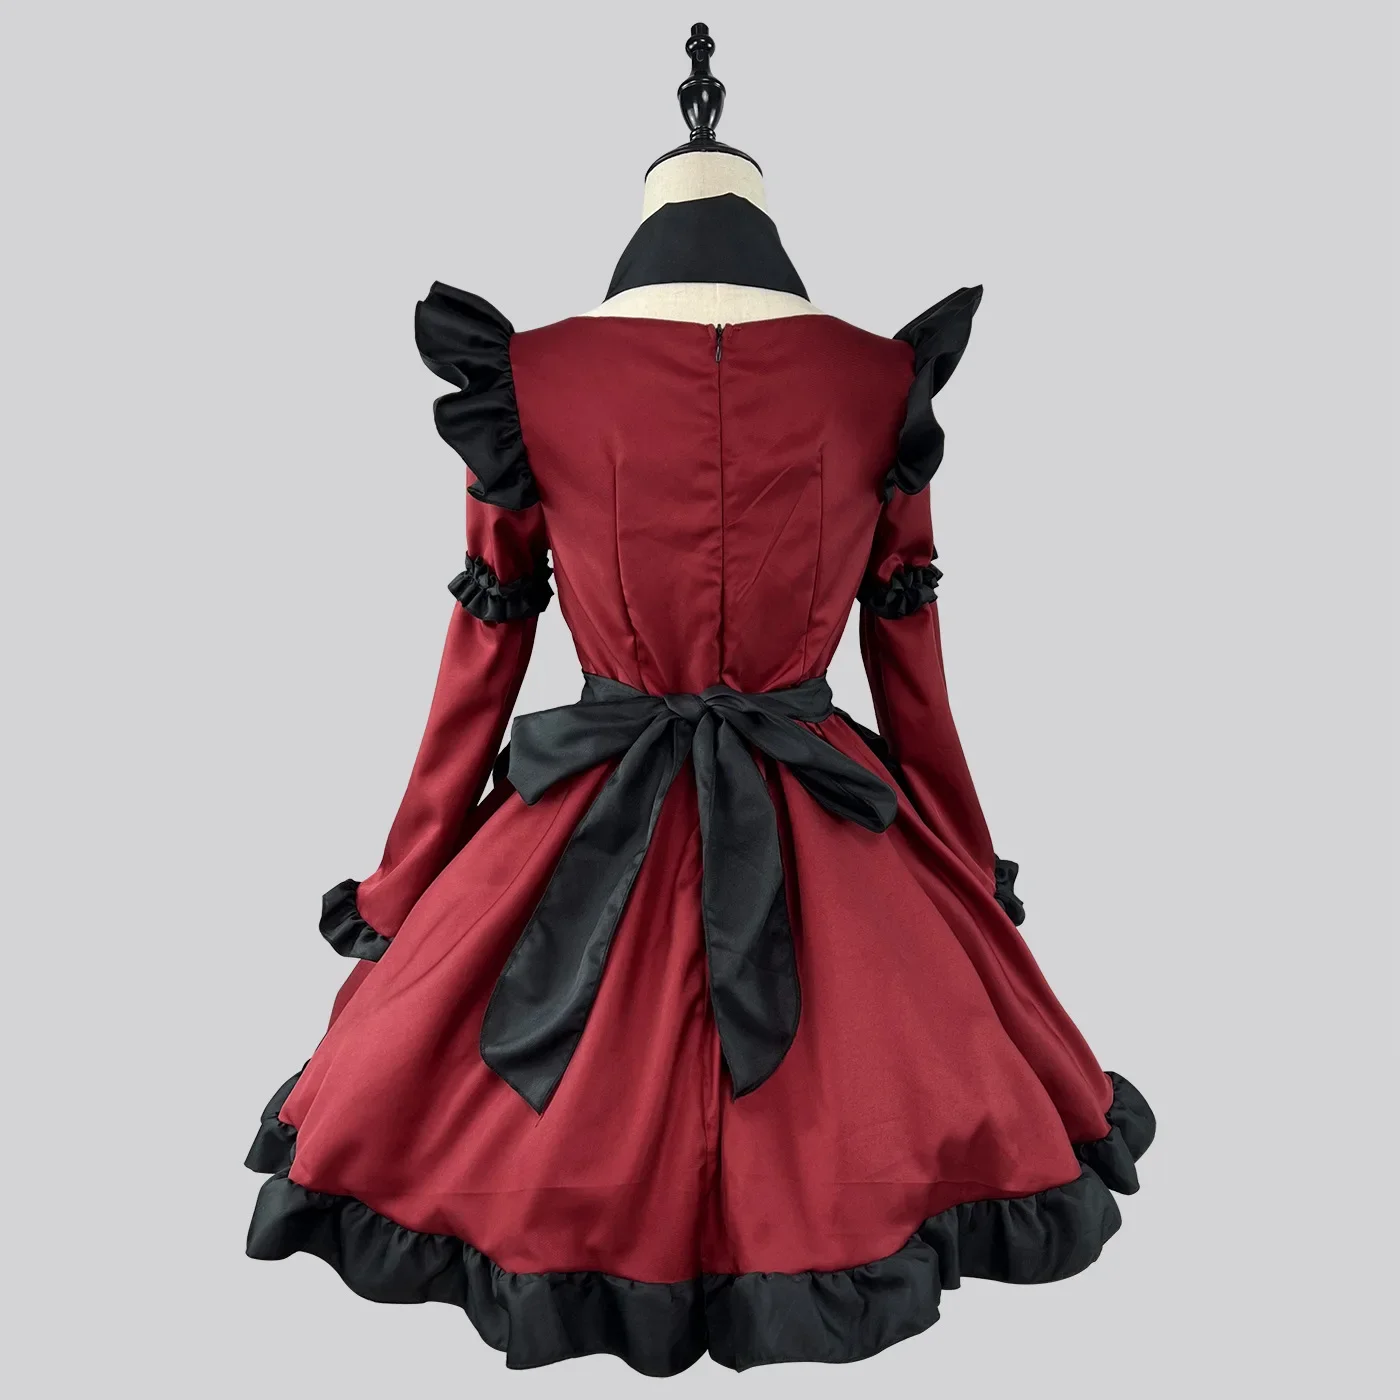 Anime Gothic Little Devil Lolita Maid Dress Cosplay Costume Red Girl Maid Dress Trending Girls Maid Party Costumes S -5XL